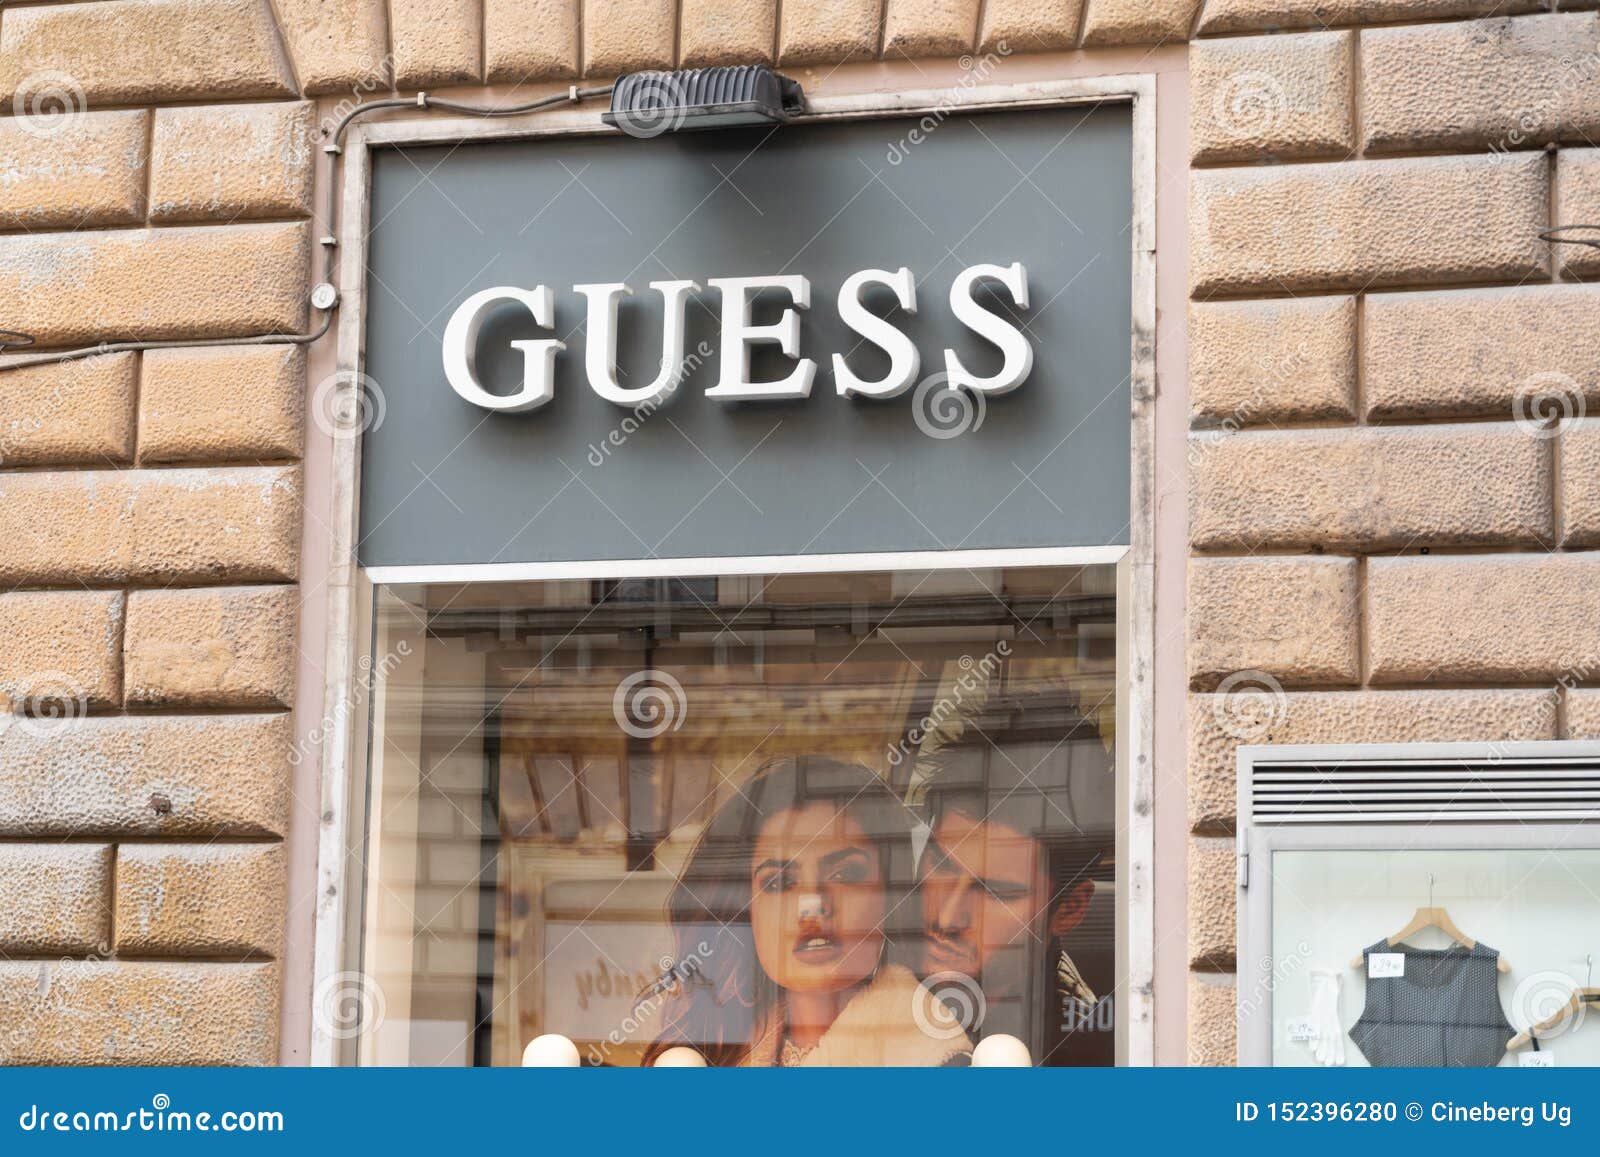 Guess clothing brand store editorial image. Image of boutique - 152396280